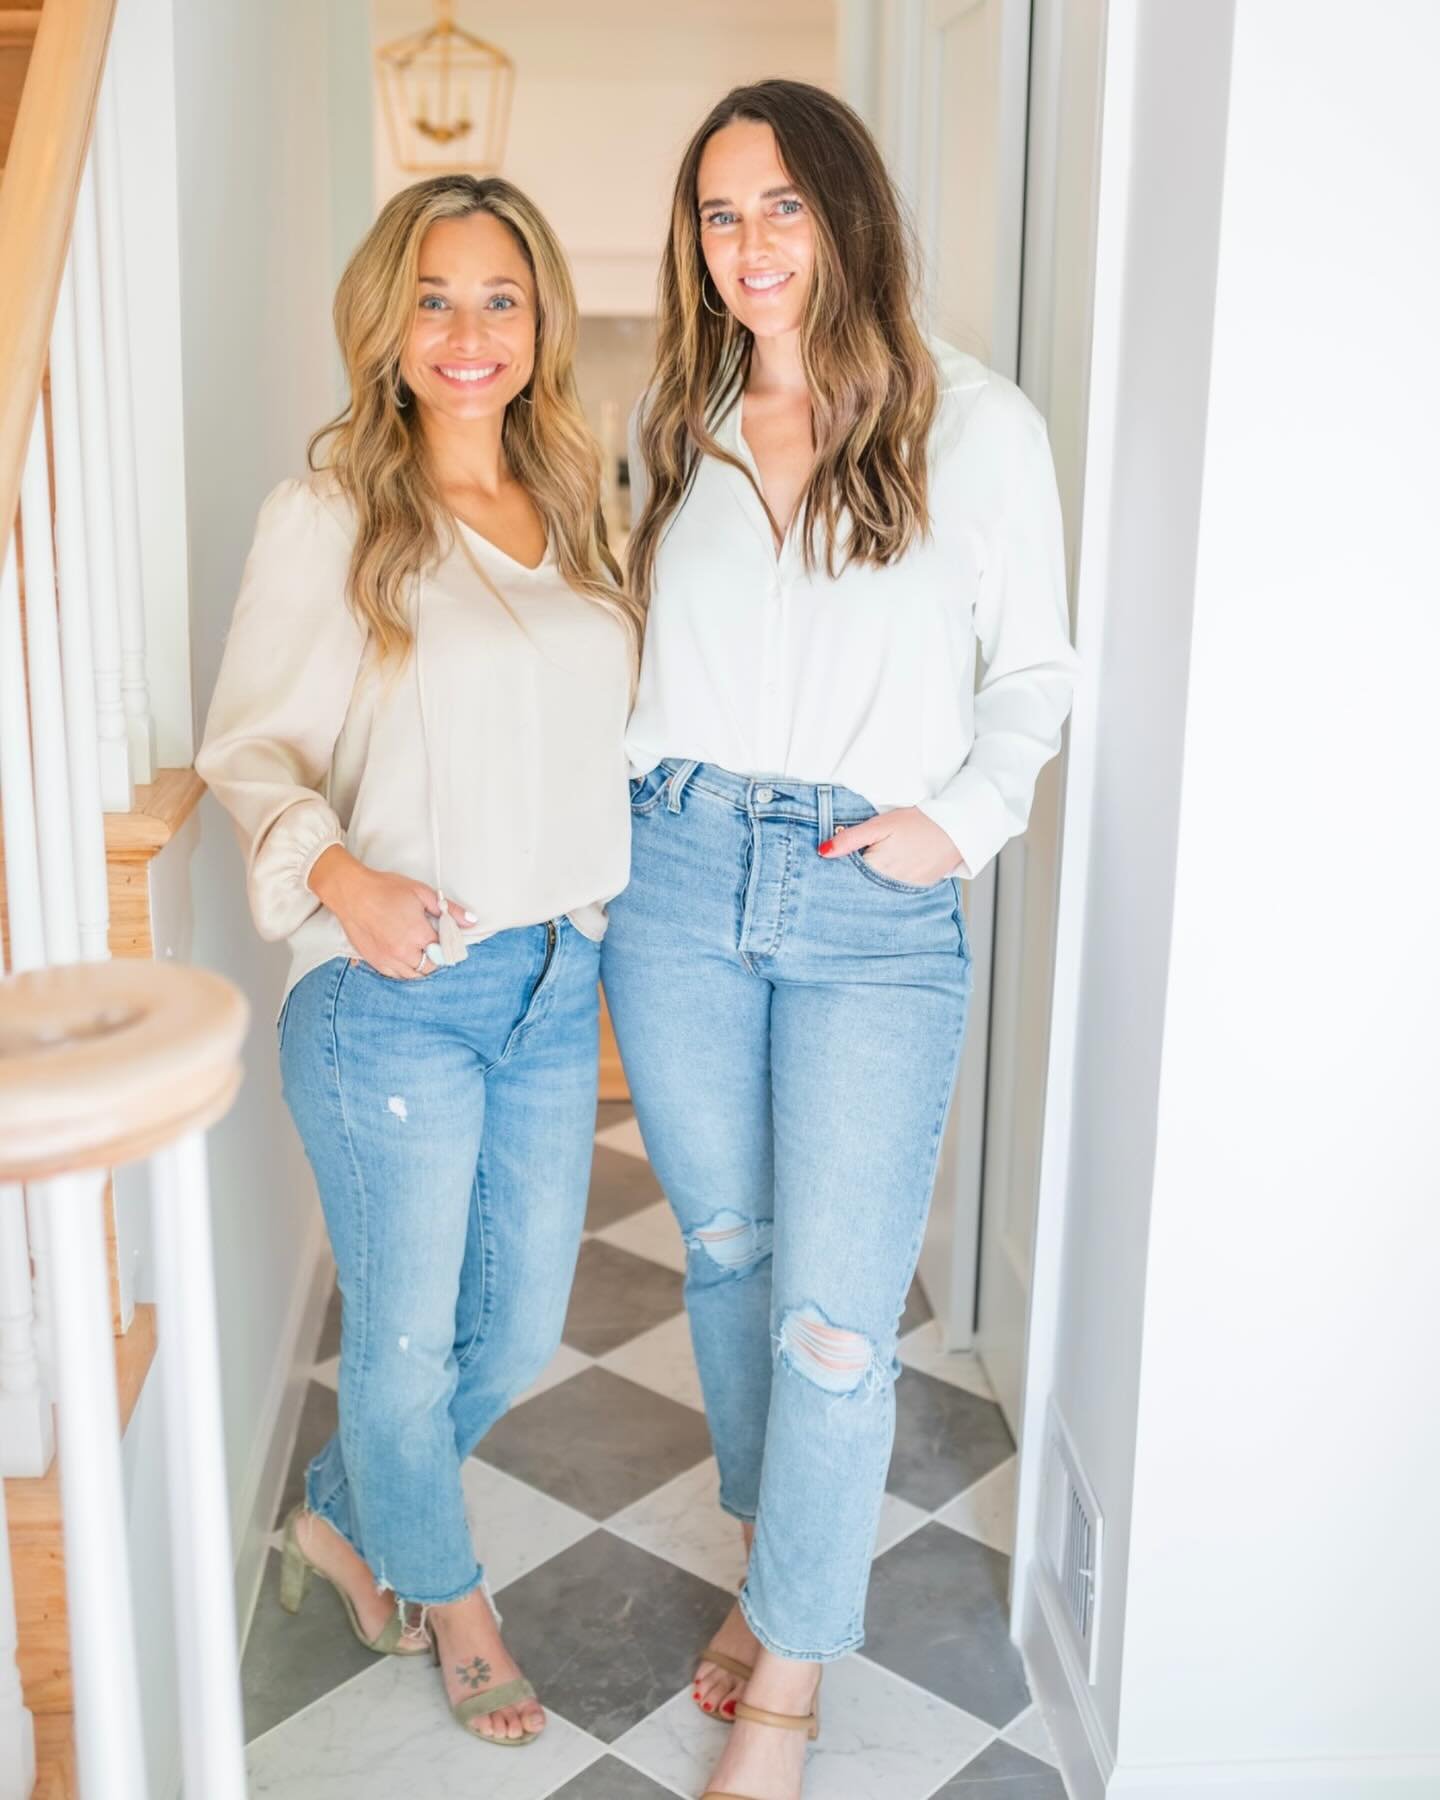 Hi! Meet Becca + Rachel; the owners and lead designers of Intuitive Design. We started our business in 2021 and have successfully completed upwards of 100 projects since! We pride ourselves on a meaningful client-designer relationship and absolutely 